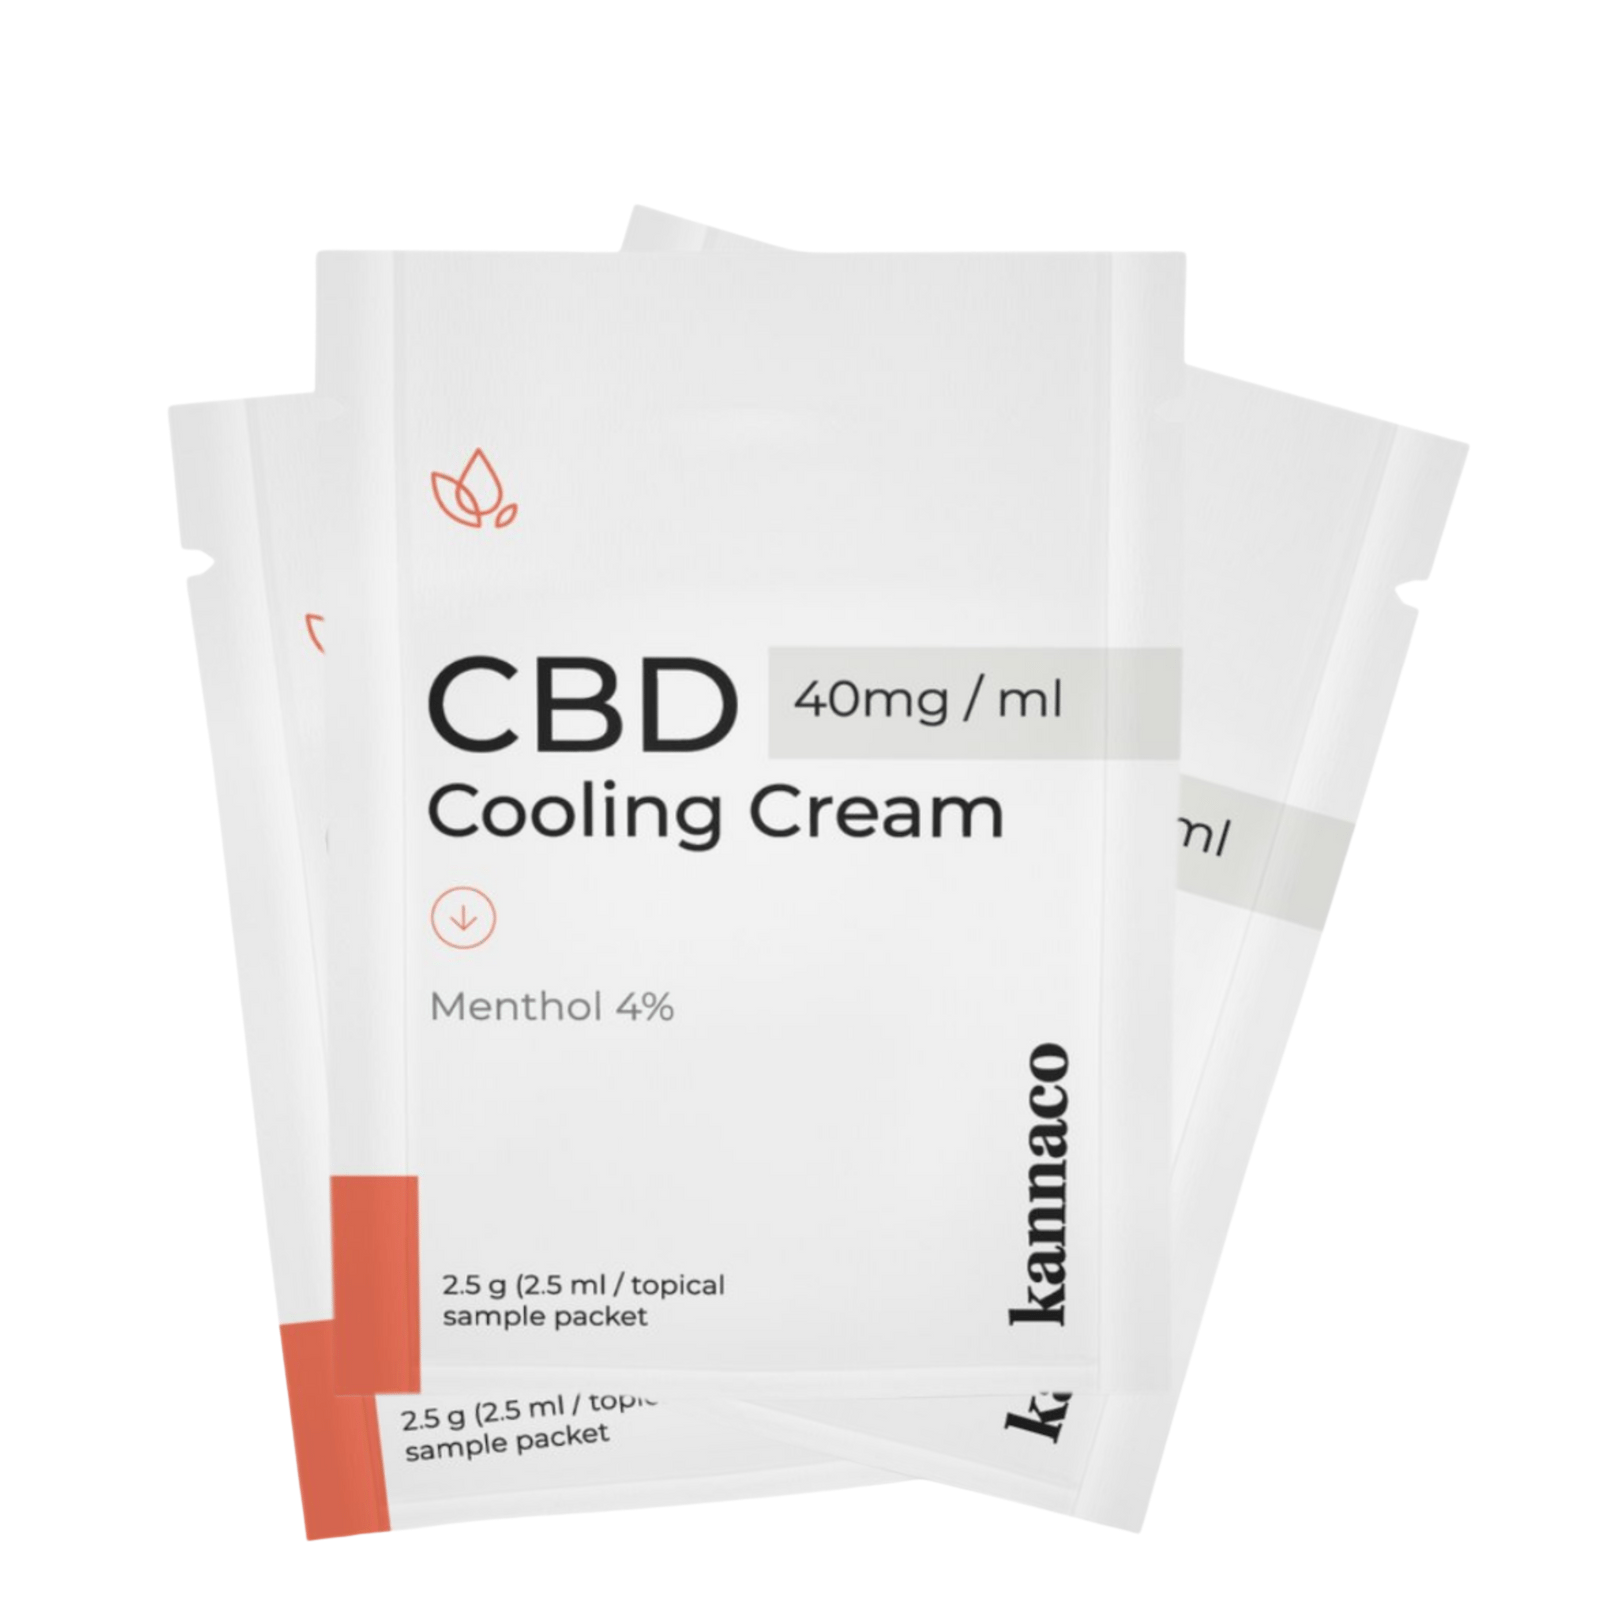 Cooling Cream Product Sample Packet